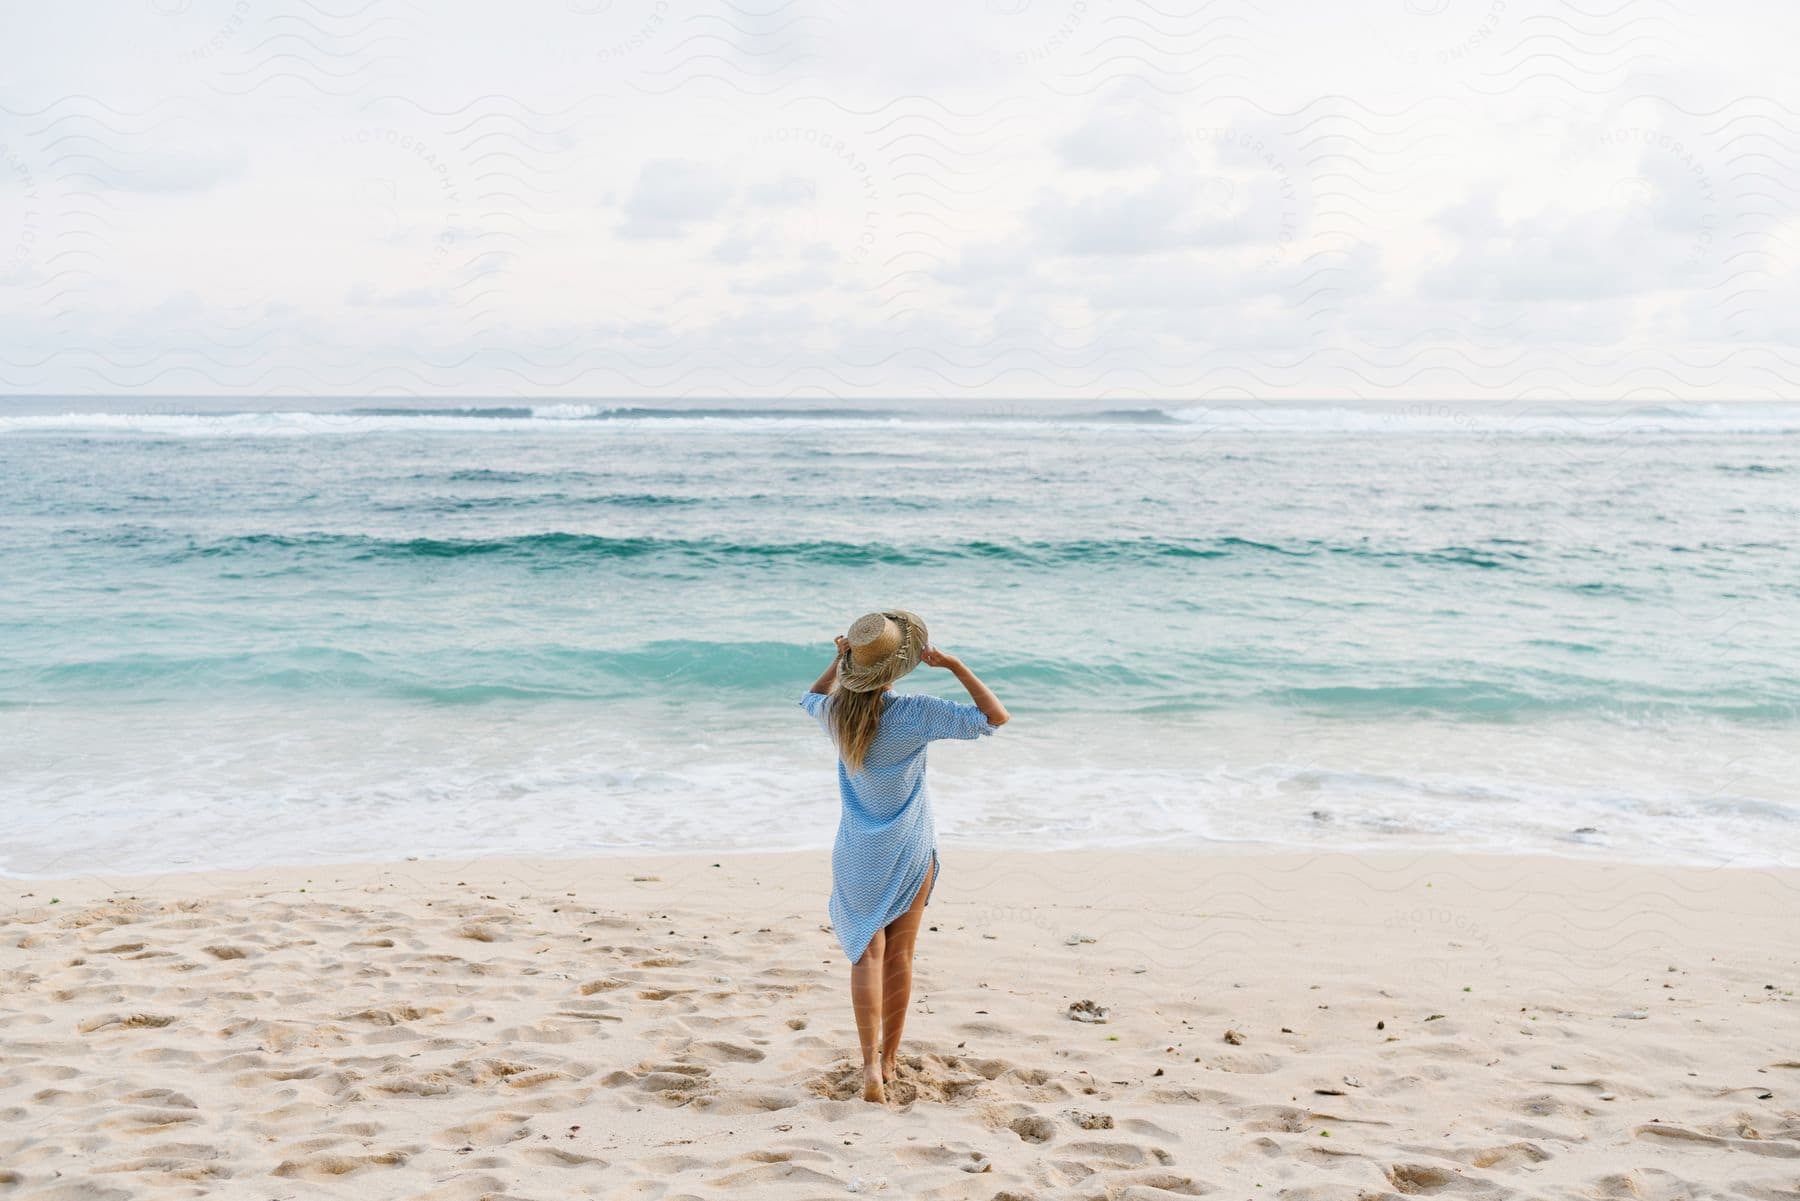 The backside of a woman standing on a sandy beach holding her sun hat as she looks out at the ocean waves